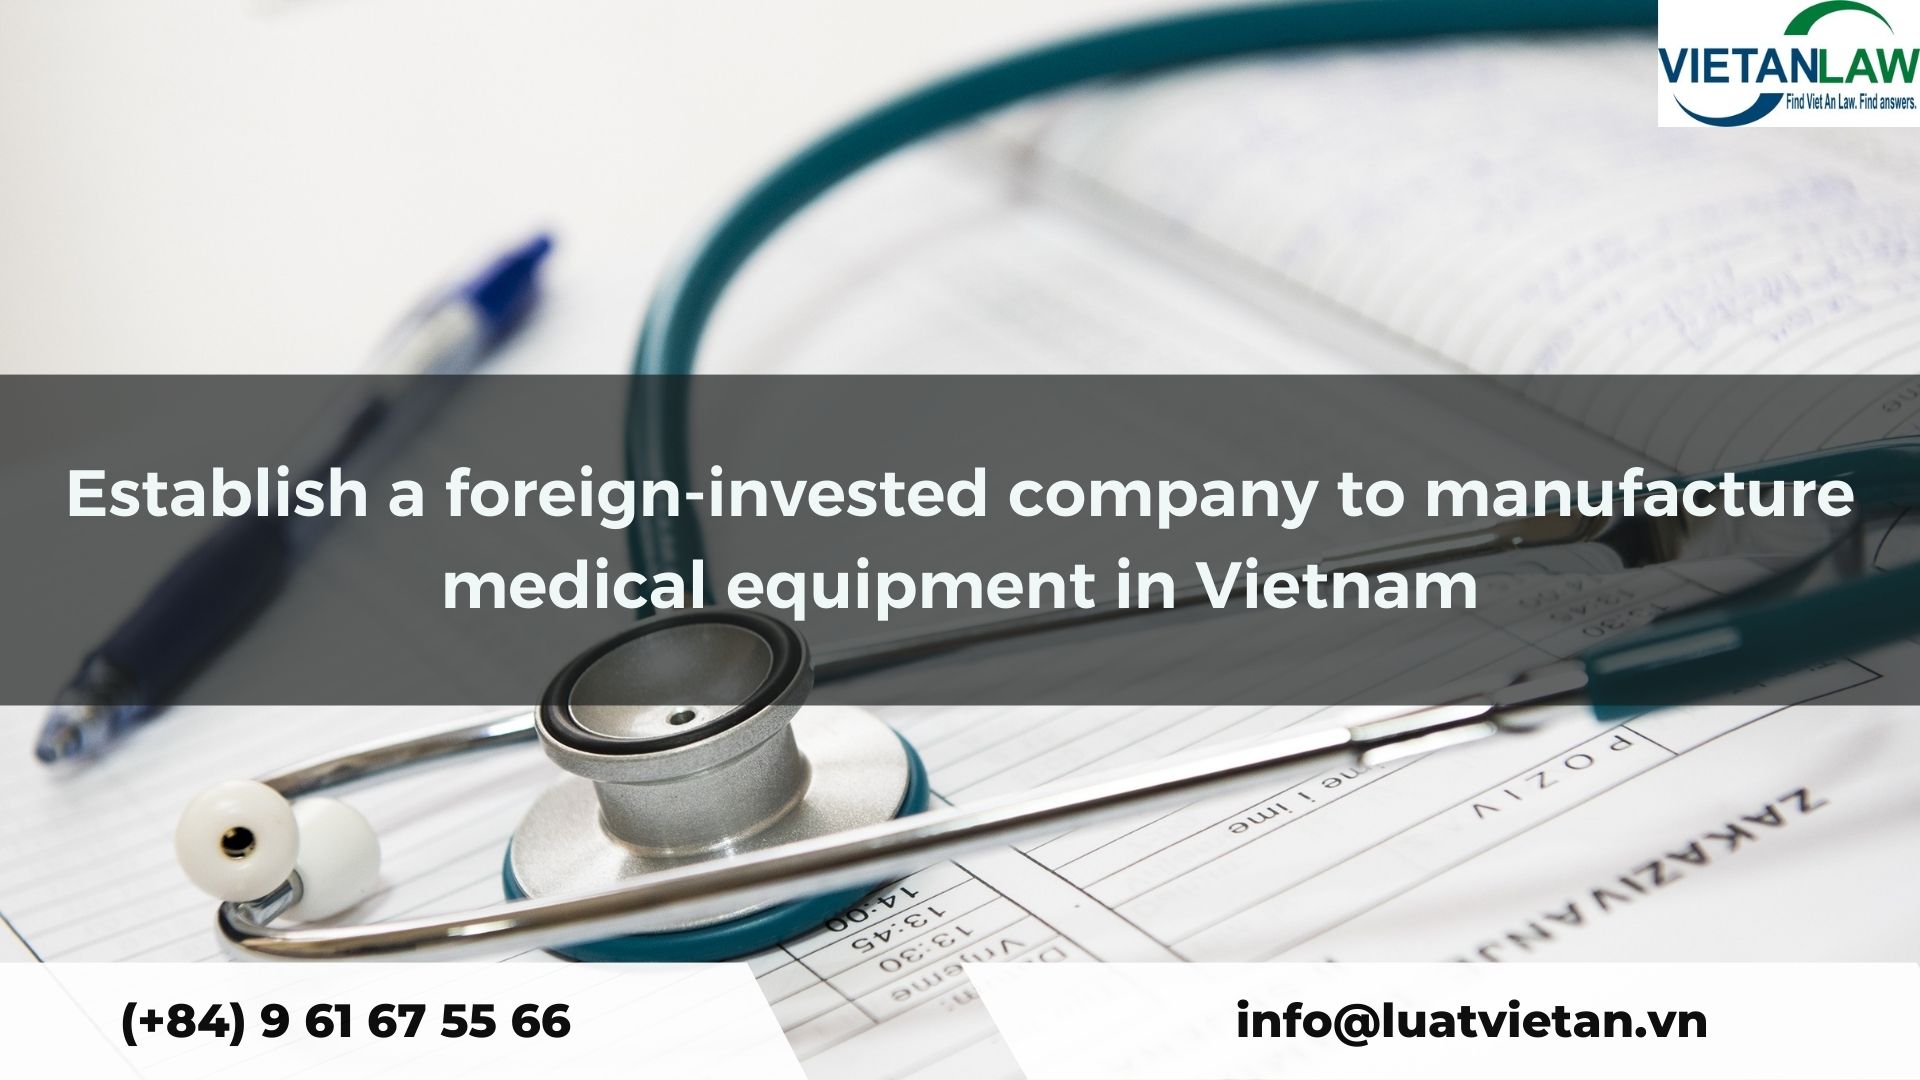 Establish a foreign-invested company to manufacture medical equipment in Vietnam